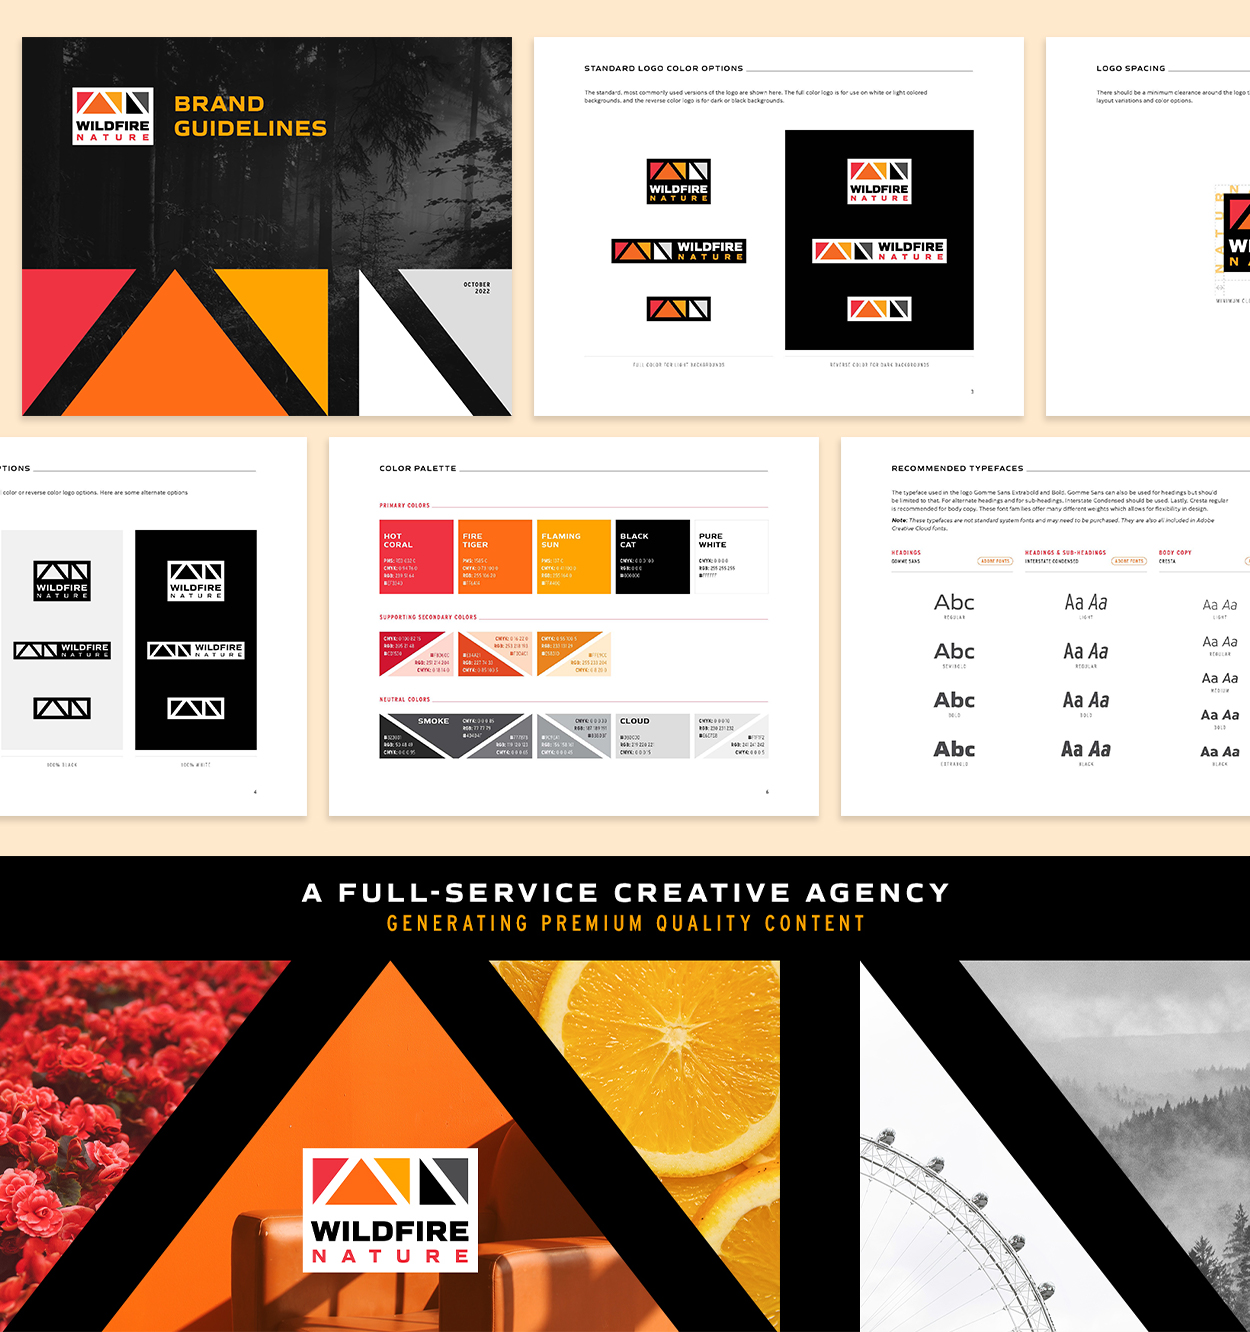 Wildfire Nature brand guidelines document and an image using brand graphics